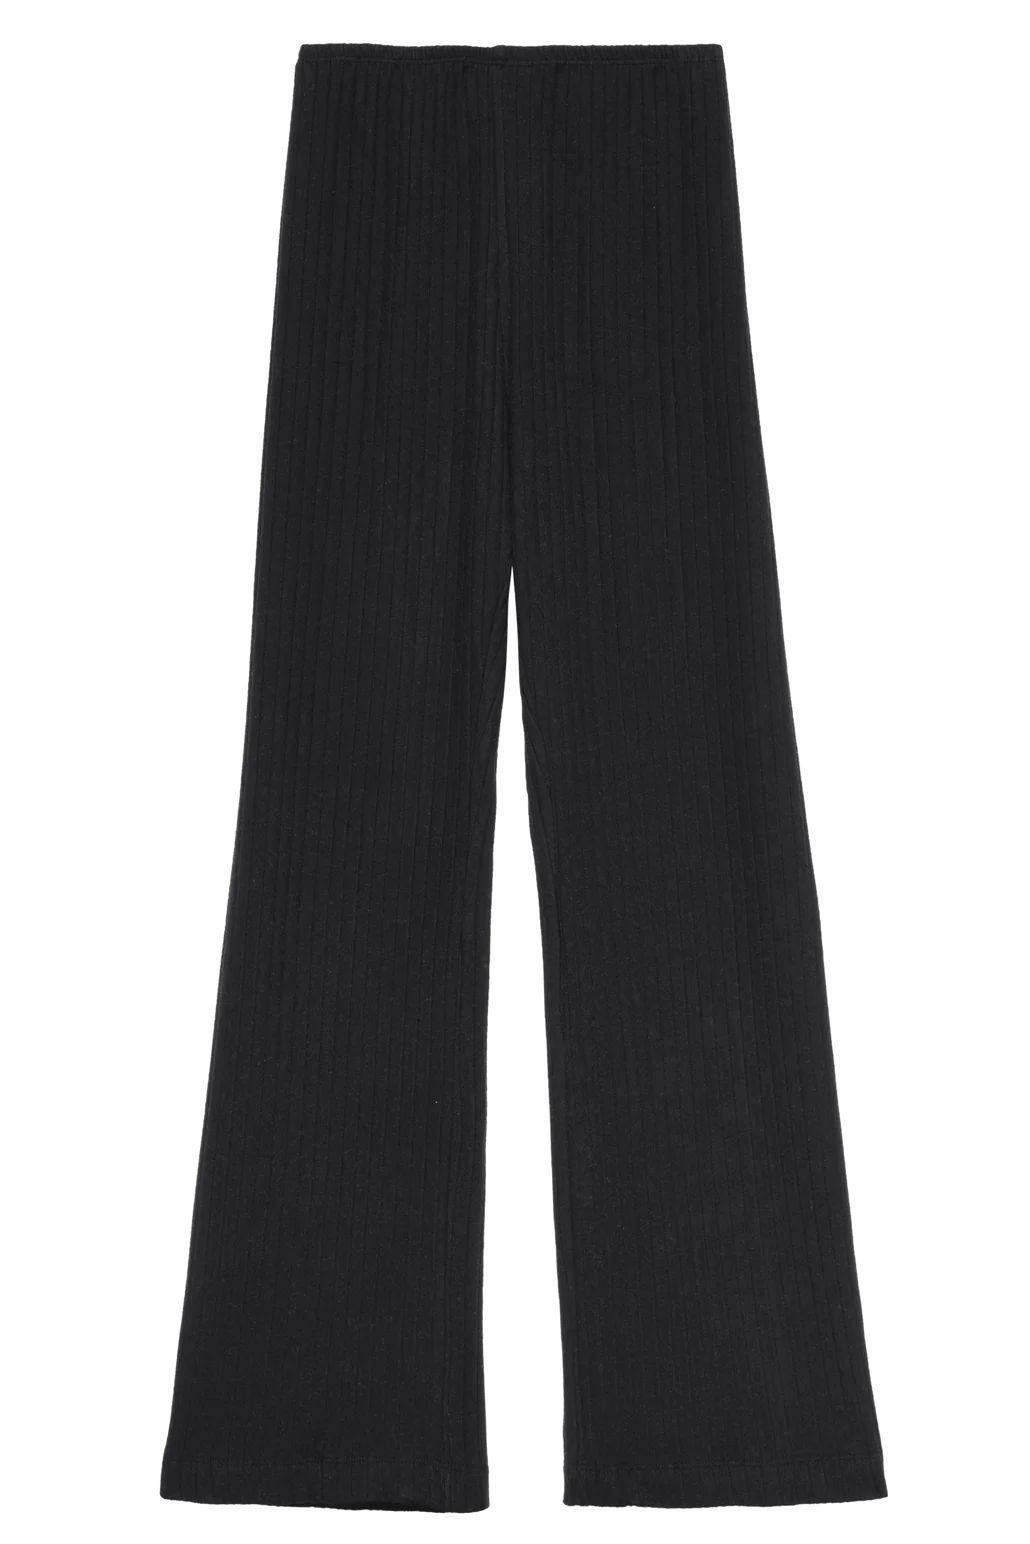 The Sweater Rib Simple Pant | DONNI.